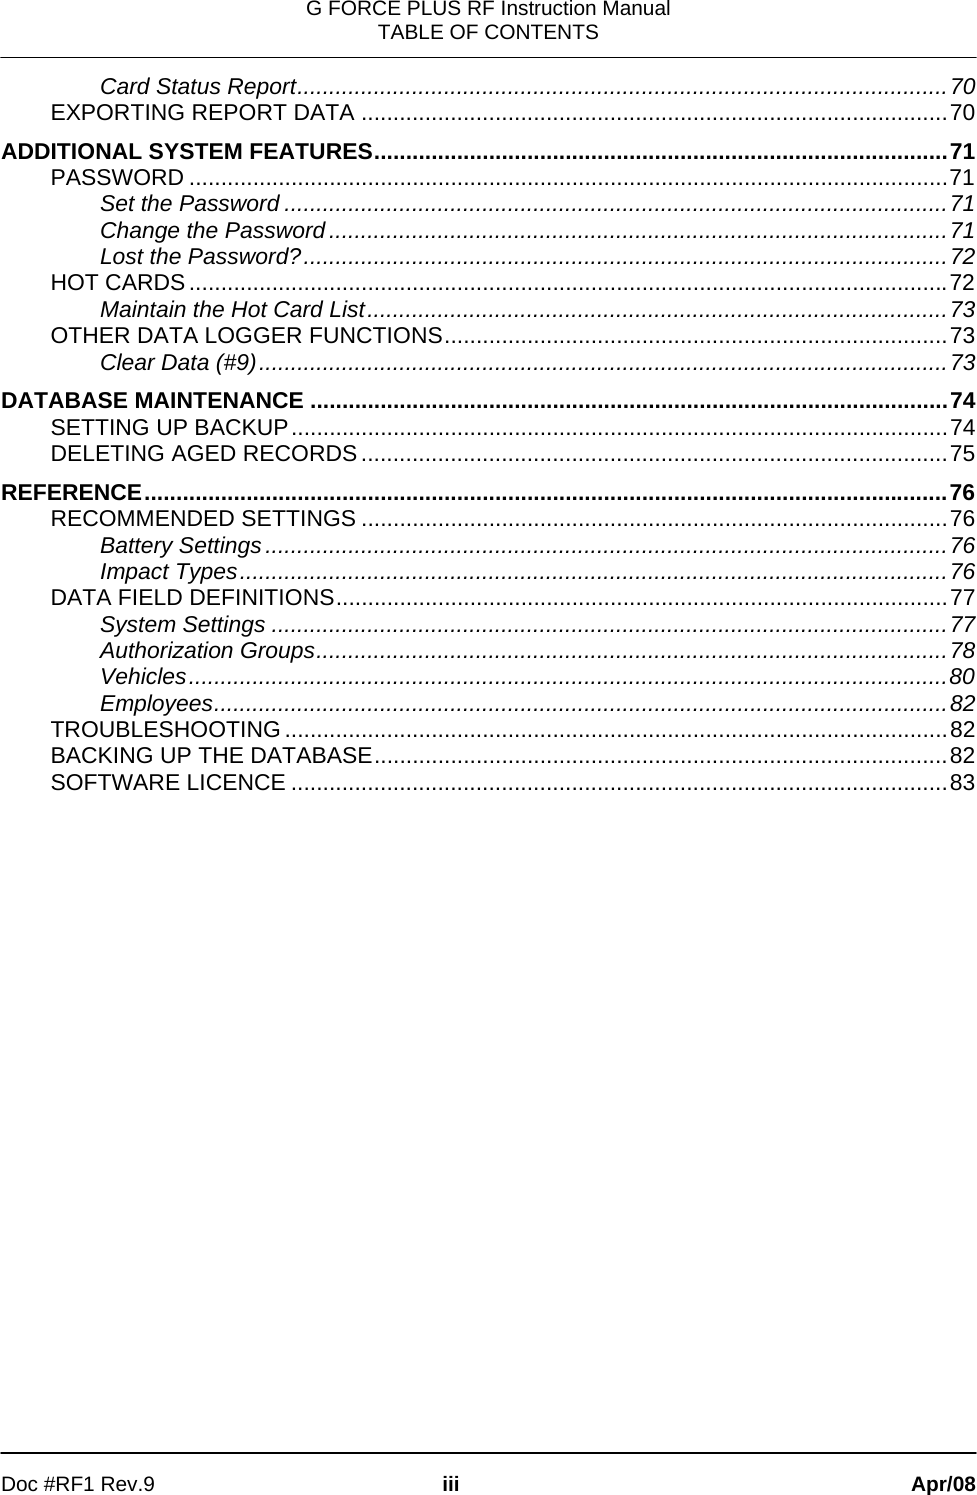 G FORCE PLUS RF Instruction Manual TABLE OF CONTENTS   Doc #RF1 Rev.9  iii Apr/08 Card Status Report......................................................................................................70 EXPORTING REPORT DATA ............................................................................................70 ADDITIONAL SYSTEM FEATURES..........................................................................................71 PASSWORD .......................................................................................................................71 Set the Password ........................................................................................................71 Change the Password.................................................................................................71 Lost the Password?.....................................................................................................72 HOT CARDS .......................................................................................................................72 Maintain the Hot Card List...........................................................................................73 OTHER DATA LOGGER FUNCTIONS...............................................................................73 Clear Data (#9)............................................................................................................73 DATABASE MAINTENANCE ....................................................................................................74 SETTING UP BACKUP.......................................................................................................74 DELETING AGED RECORDS ............................................................................................75 REFERENCE..............................................................................................................................76 RECOMMENDED SETTINGS ............................................................................................76 Battery Settings...........................................................................................................76 Impact Types...............................................................................................................76 DATA FIELD DEFINITIONS................................................................................................77 System Settings ..........................................................................................................77 Authorization Groups...................................................................................................78 Vehicles.......................................................................................................................80 Employees...................................................................................................................82 TROUBLESHOOTING ........................................................................................................82 BACKING UP THE DATABASE..........................................................................................82 SOFTWARE LICENCE .......................................................................................................83 